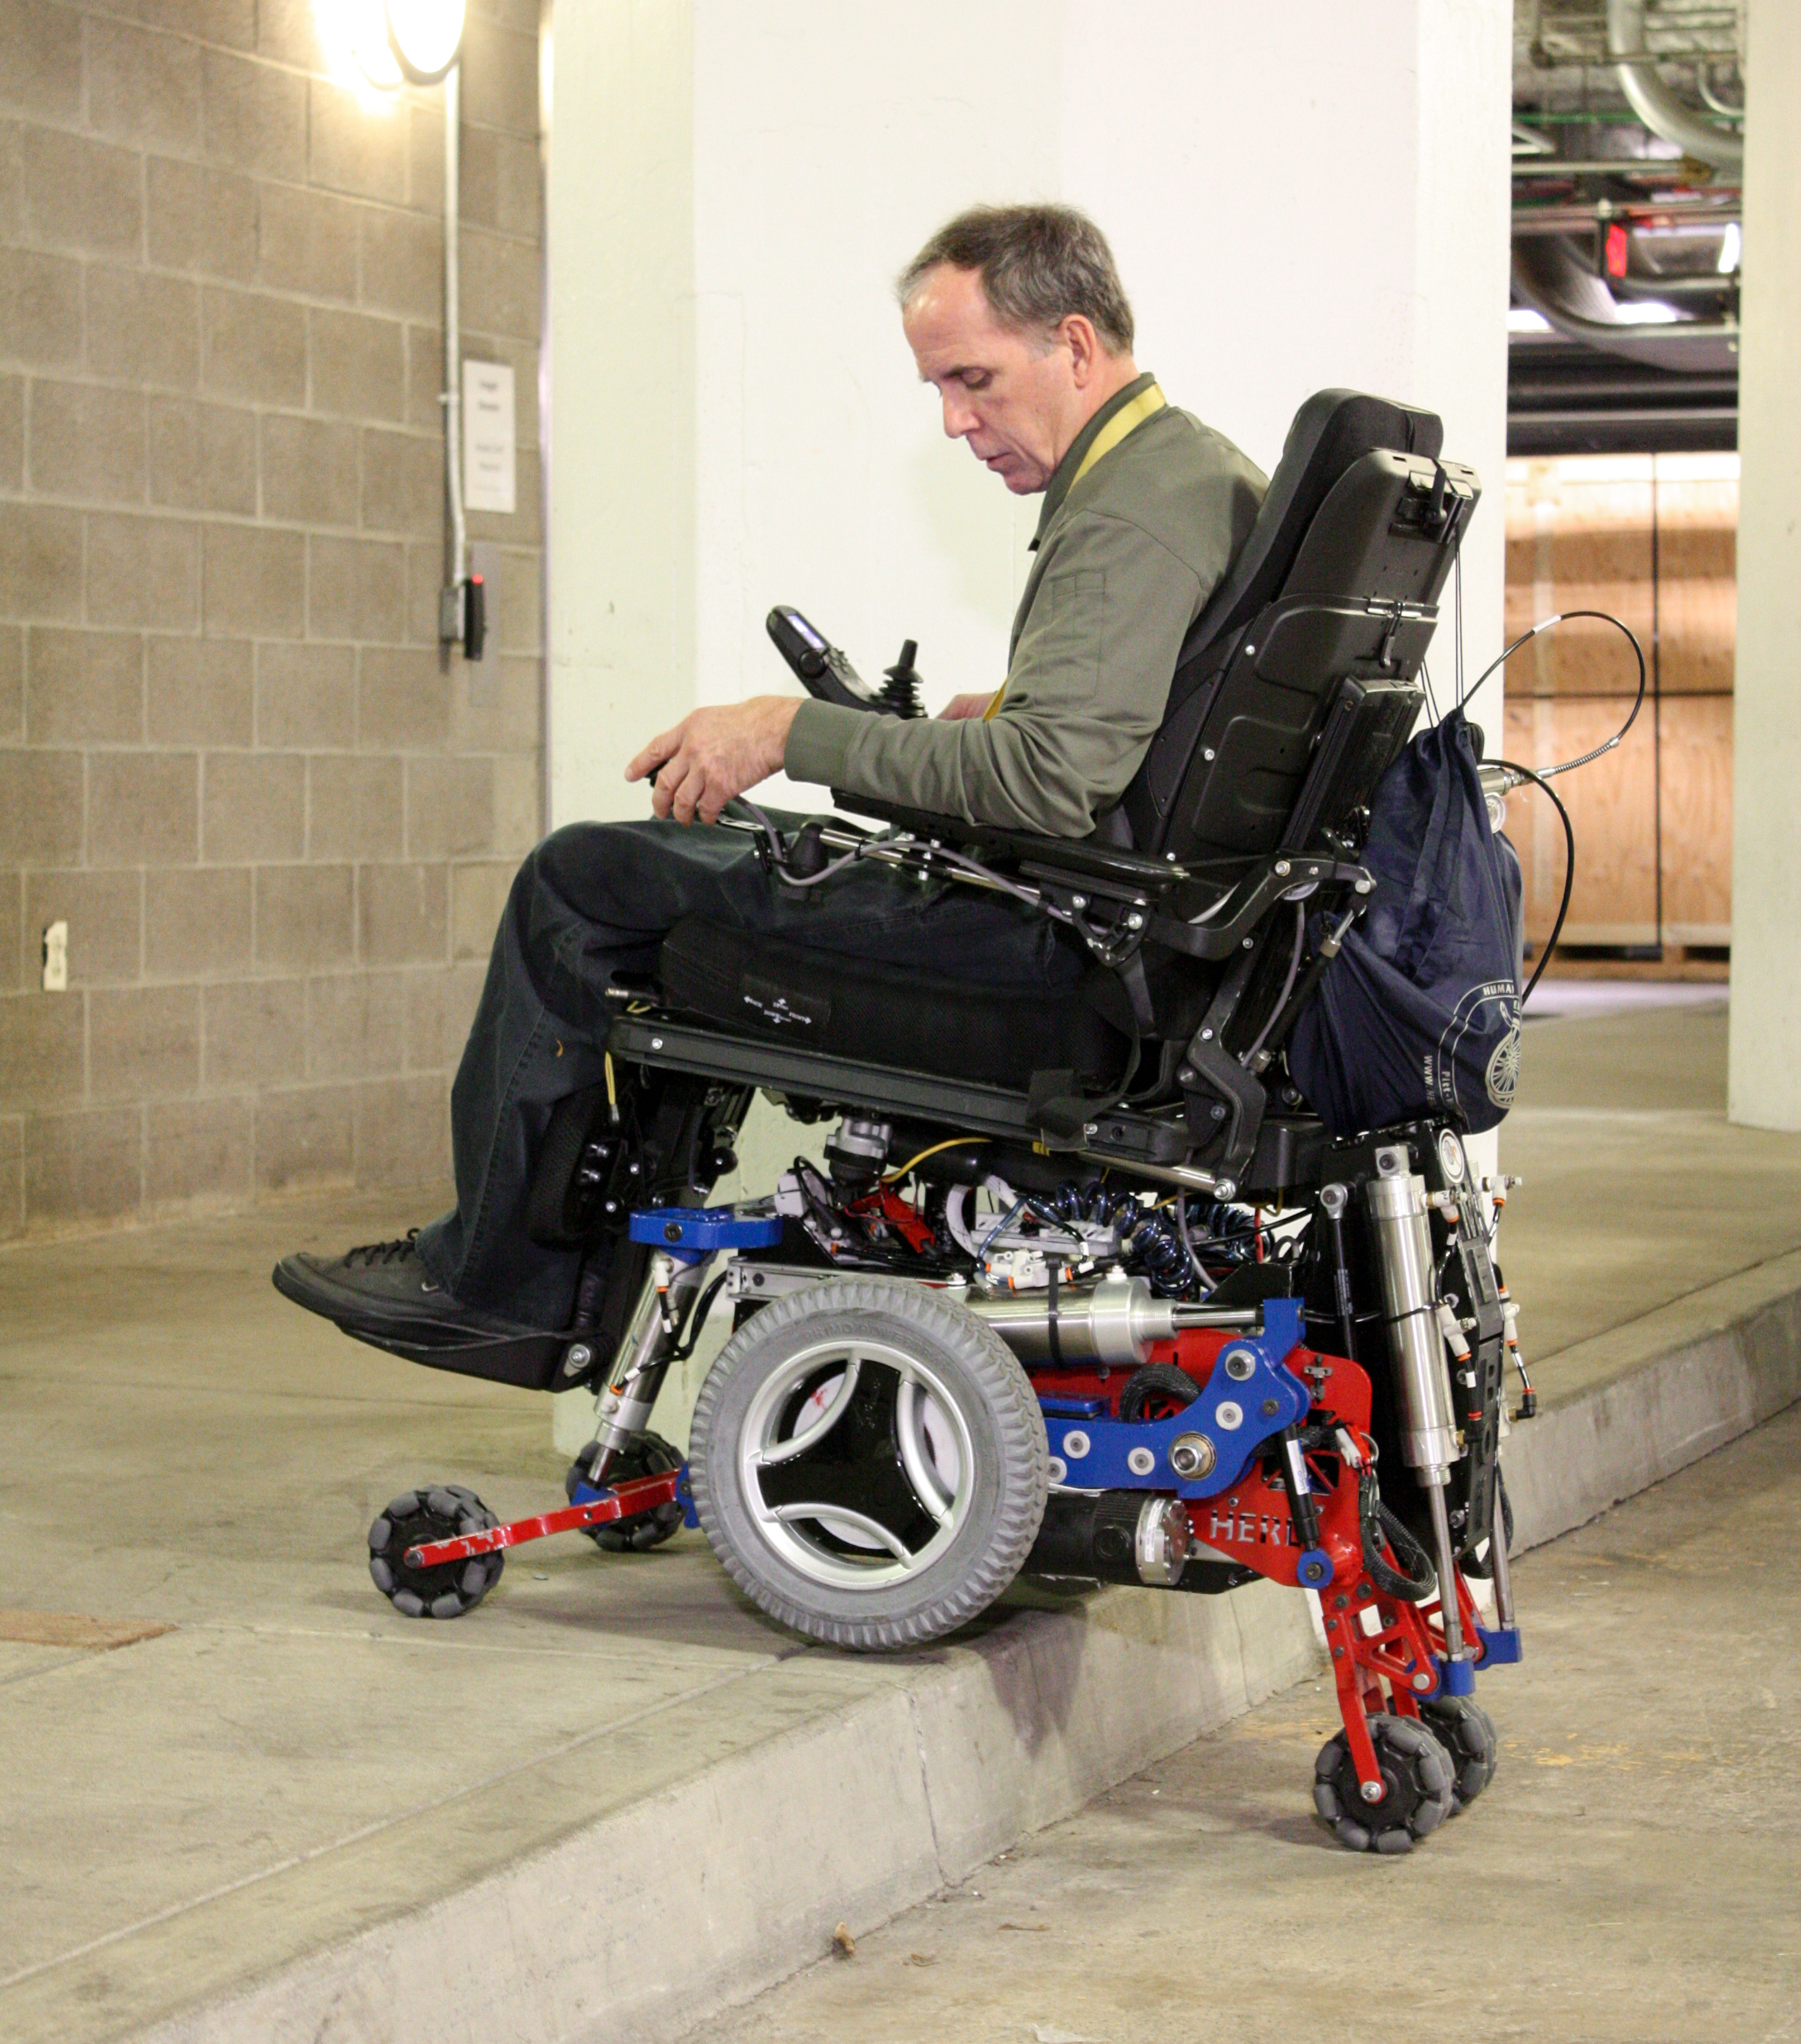 Rory Cooper, who is paralyzed from the waist down, climbing a curb in his MEBot power chair